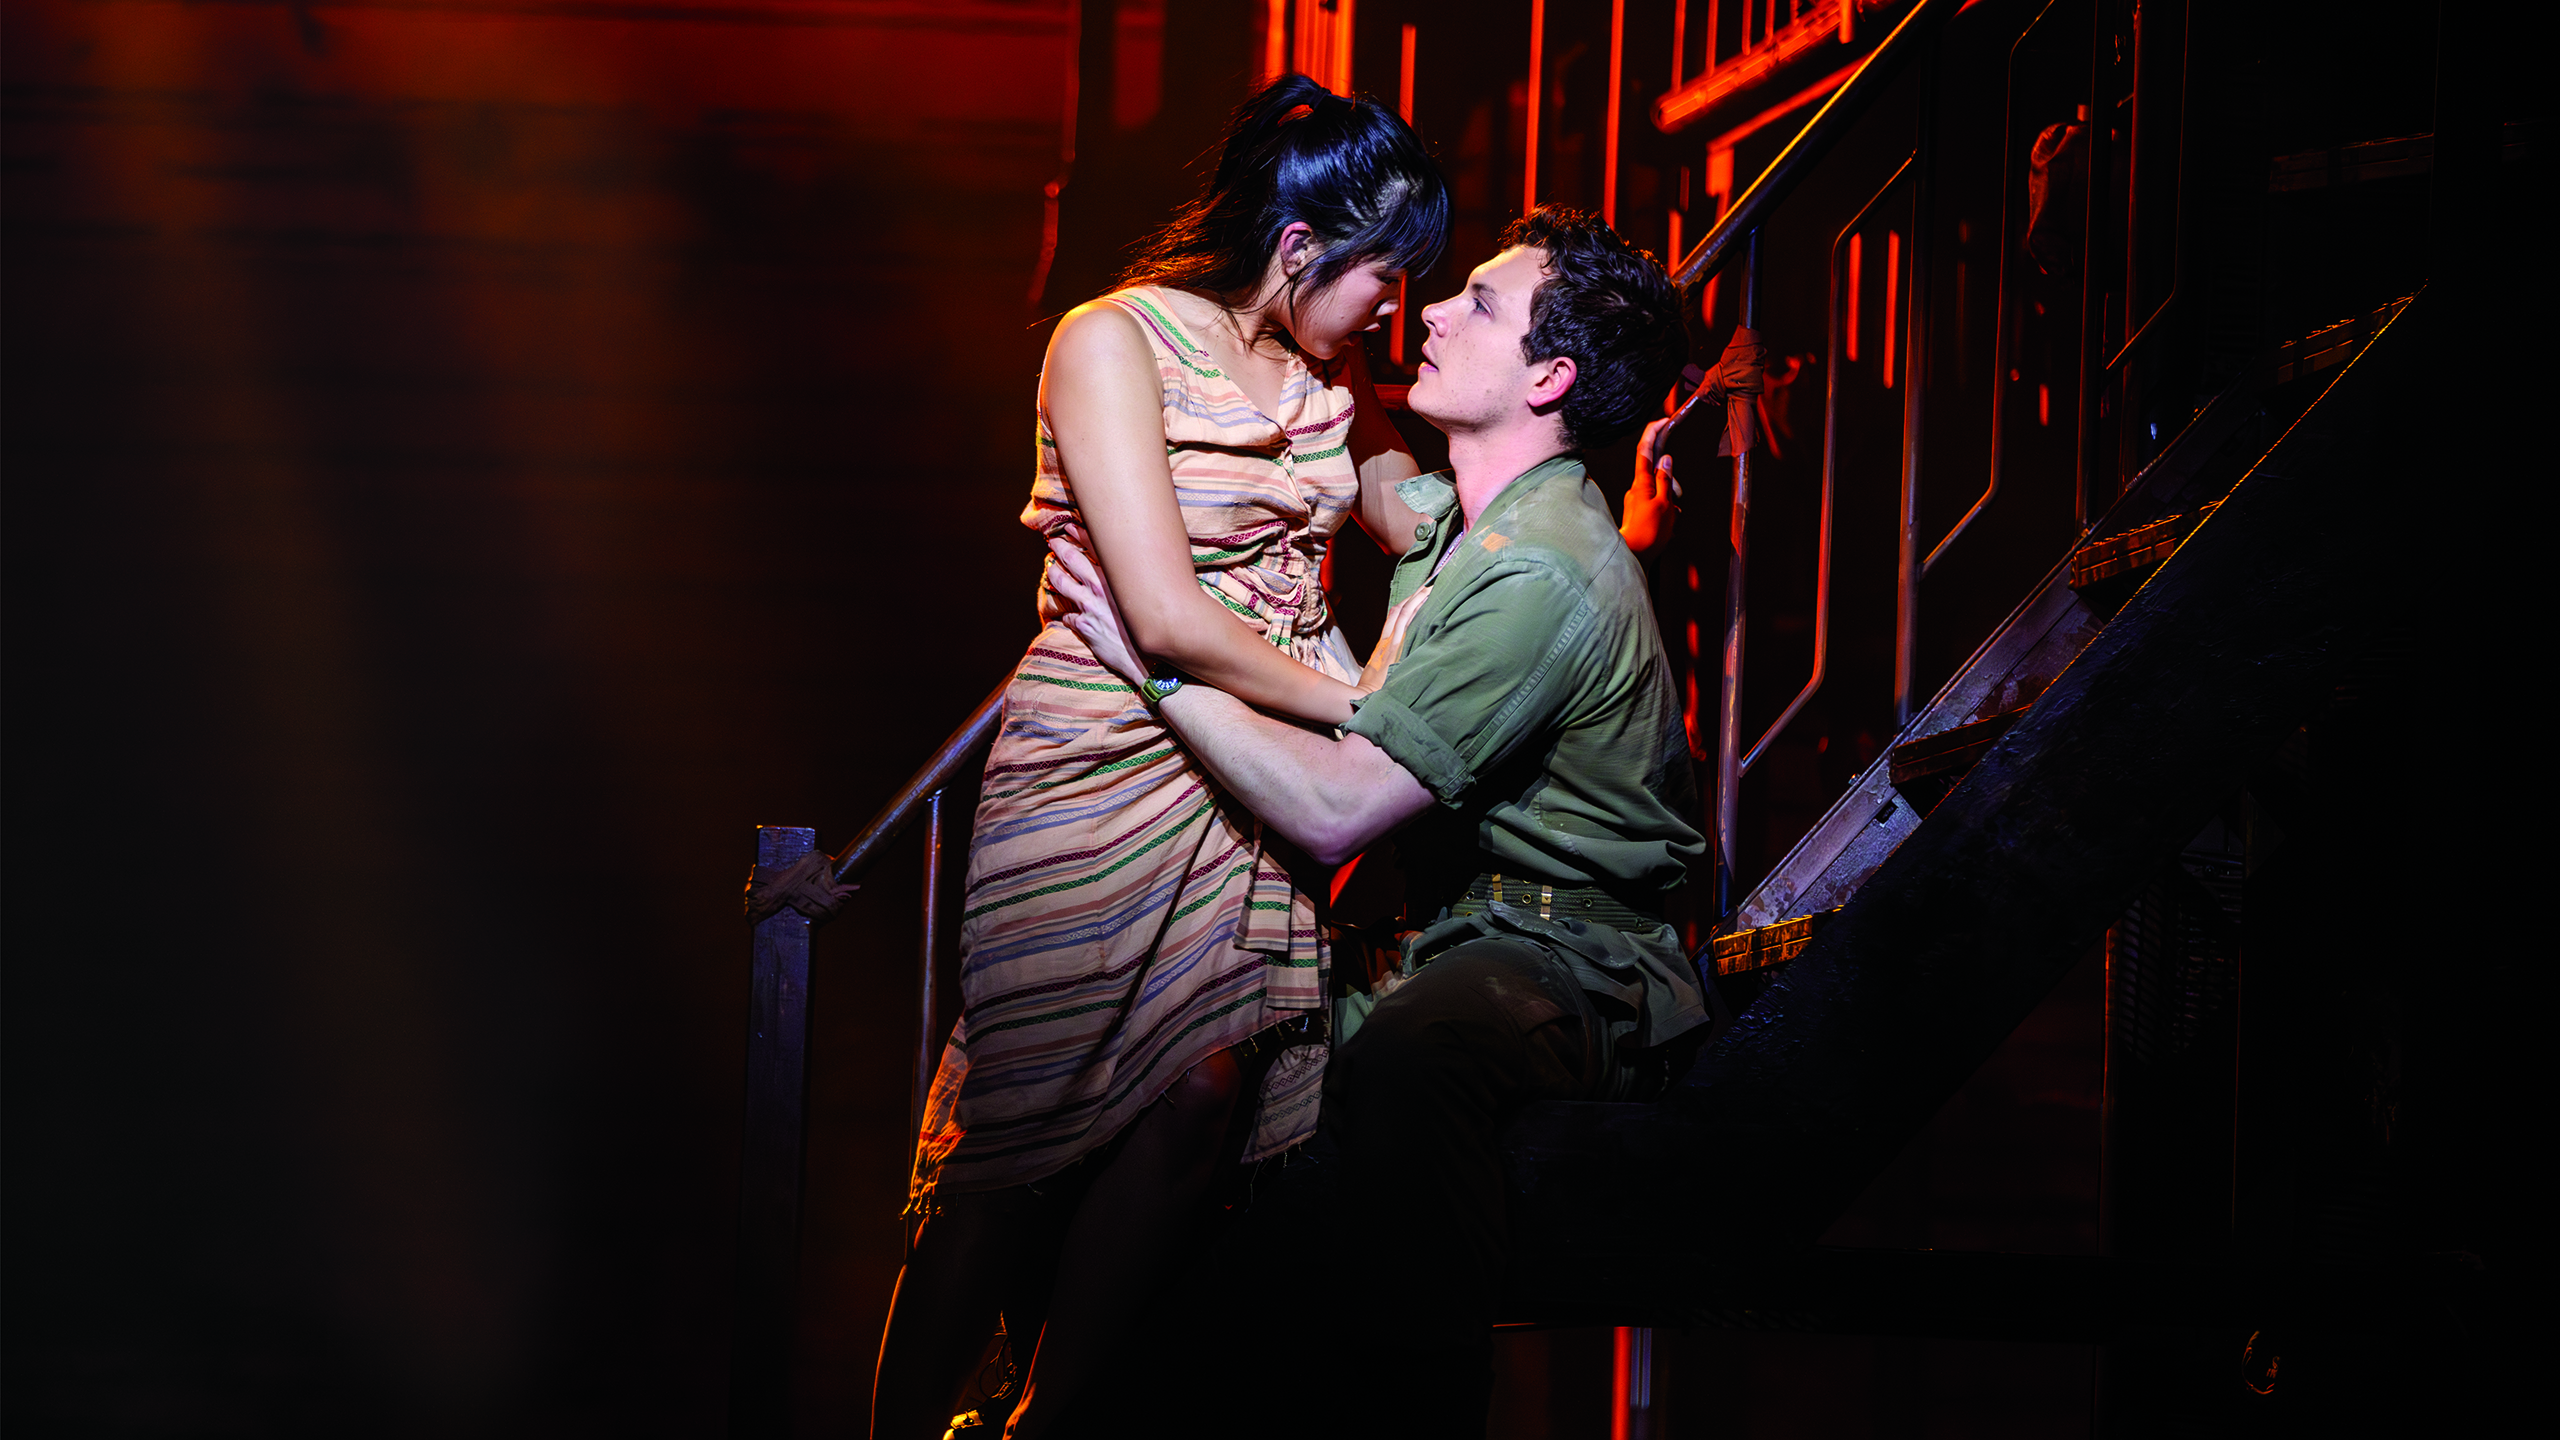 An Asian woman and a white man are perched on stairs holding each other lovingly.